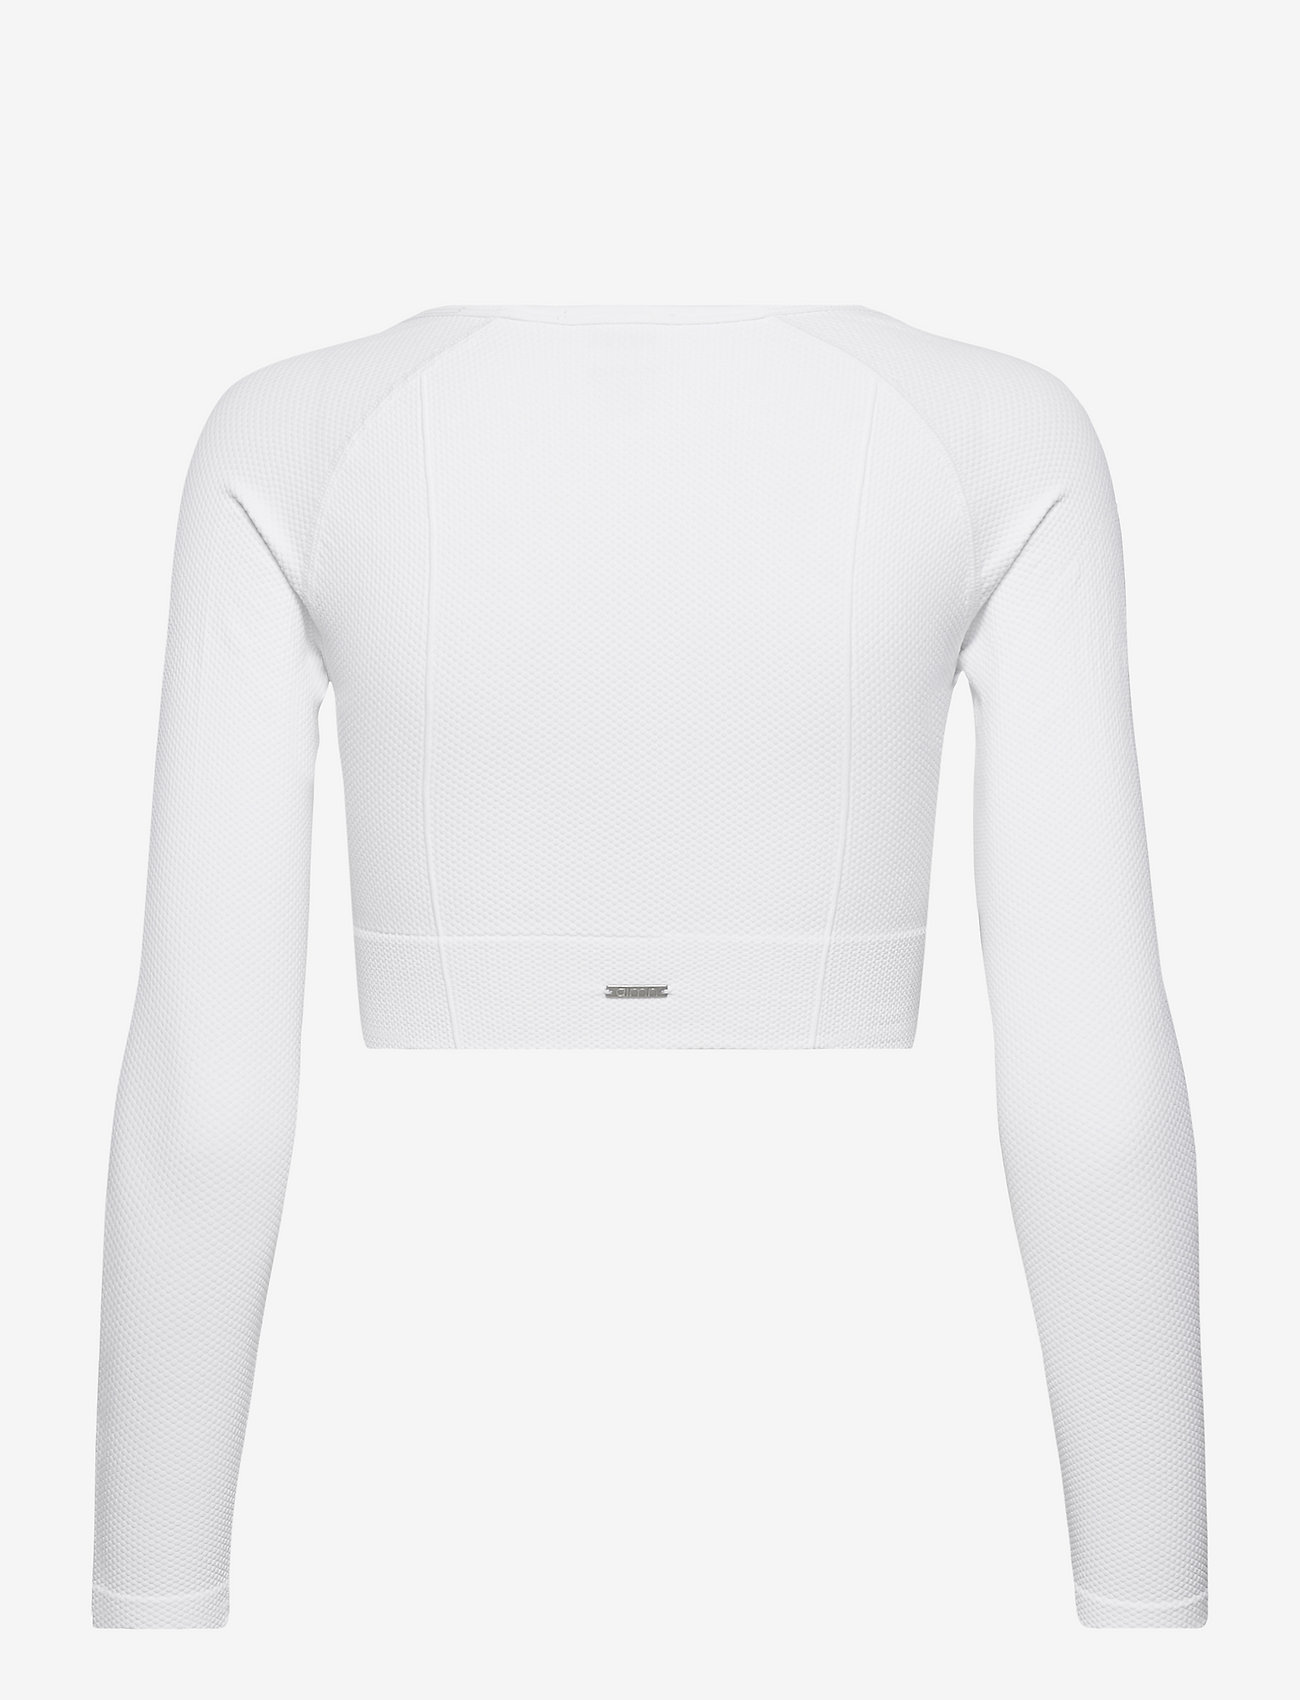 AIM'N - LUXE SEAMLESS CROPPED LONG SLEEVE - pitkähihaiset topit - white - 1